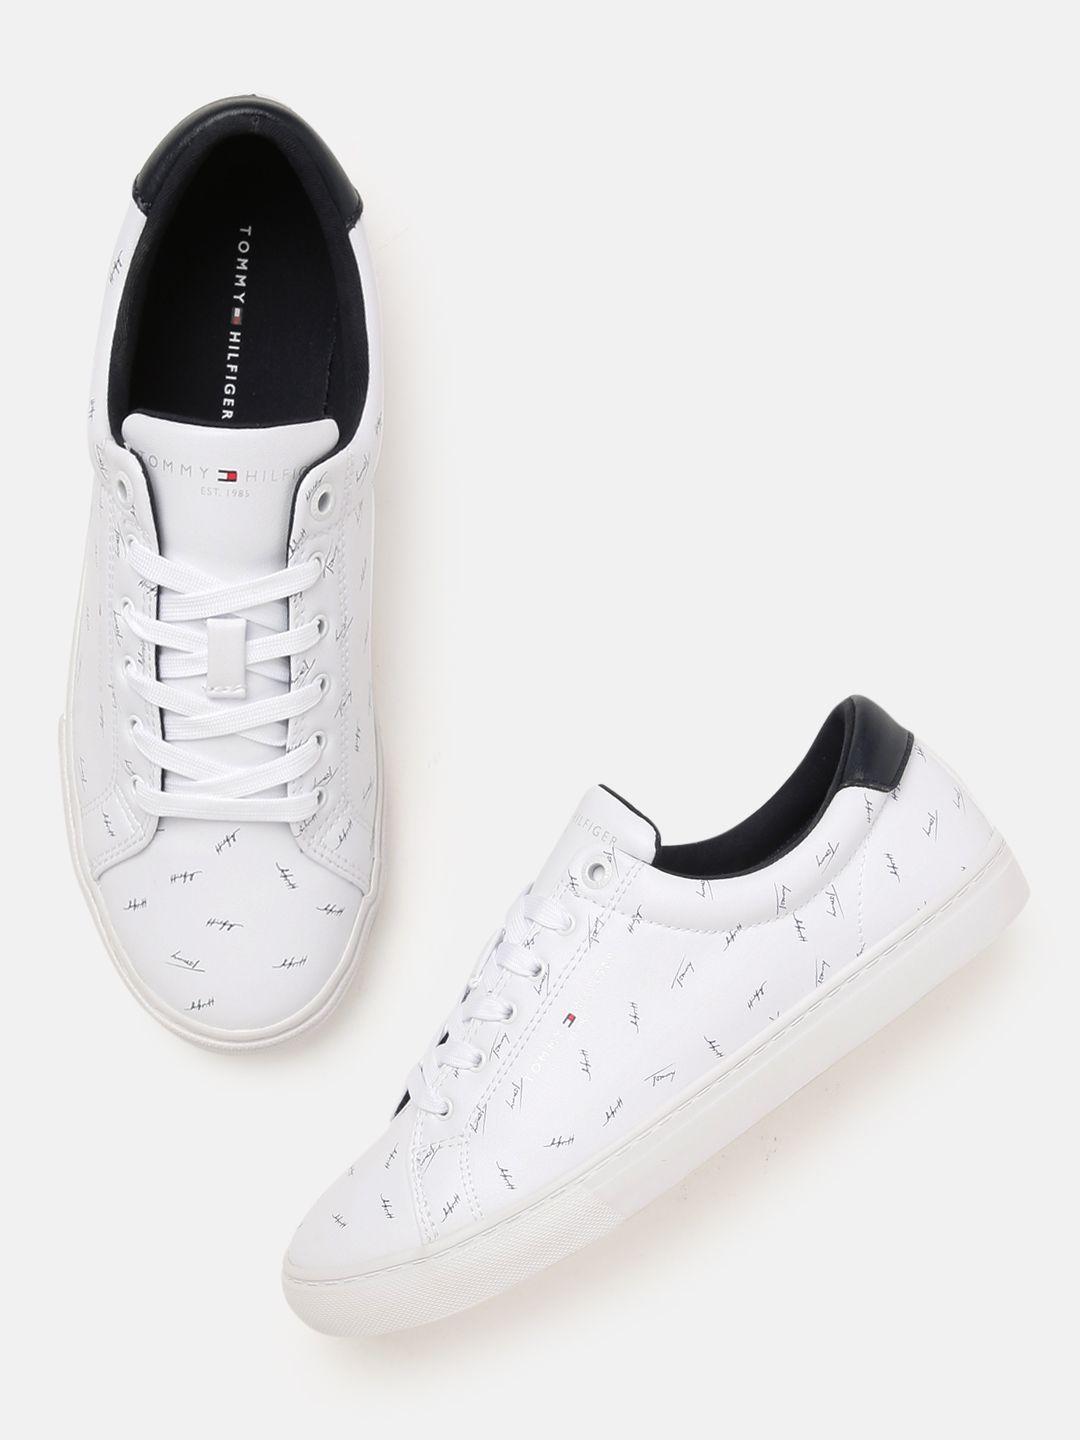 Tommy Hilfiger Women White Typography Printed Regular Sneakers Price in India